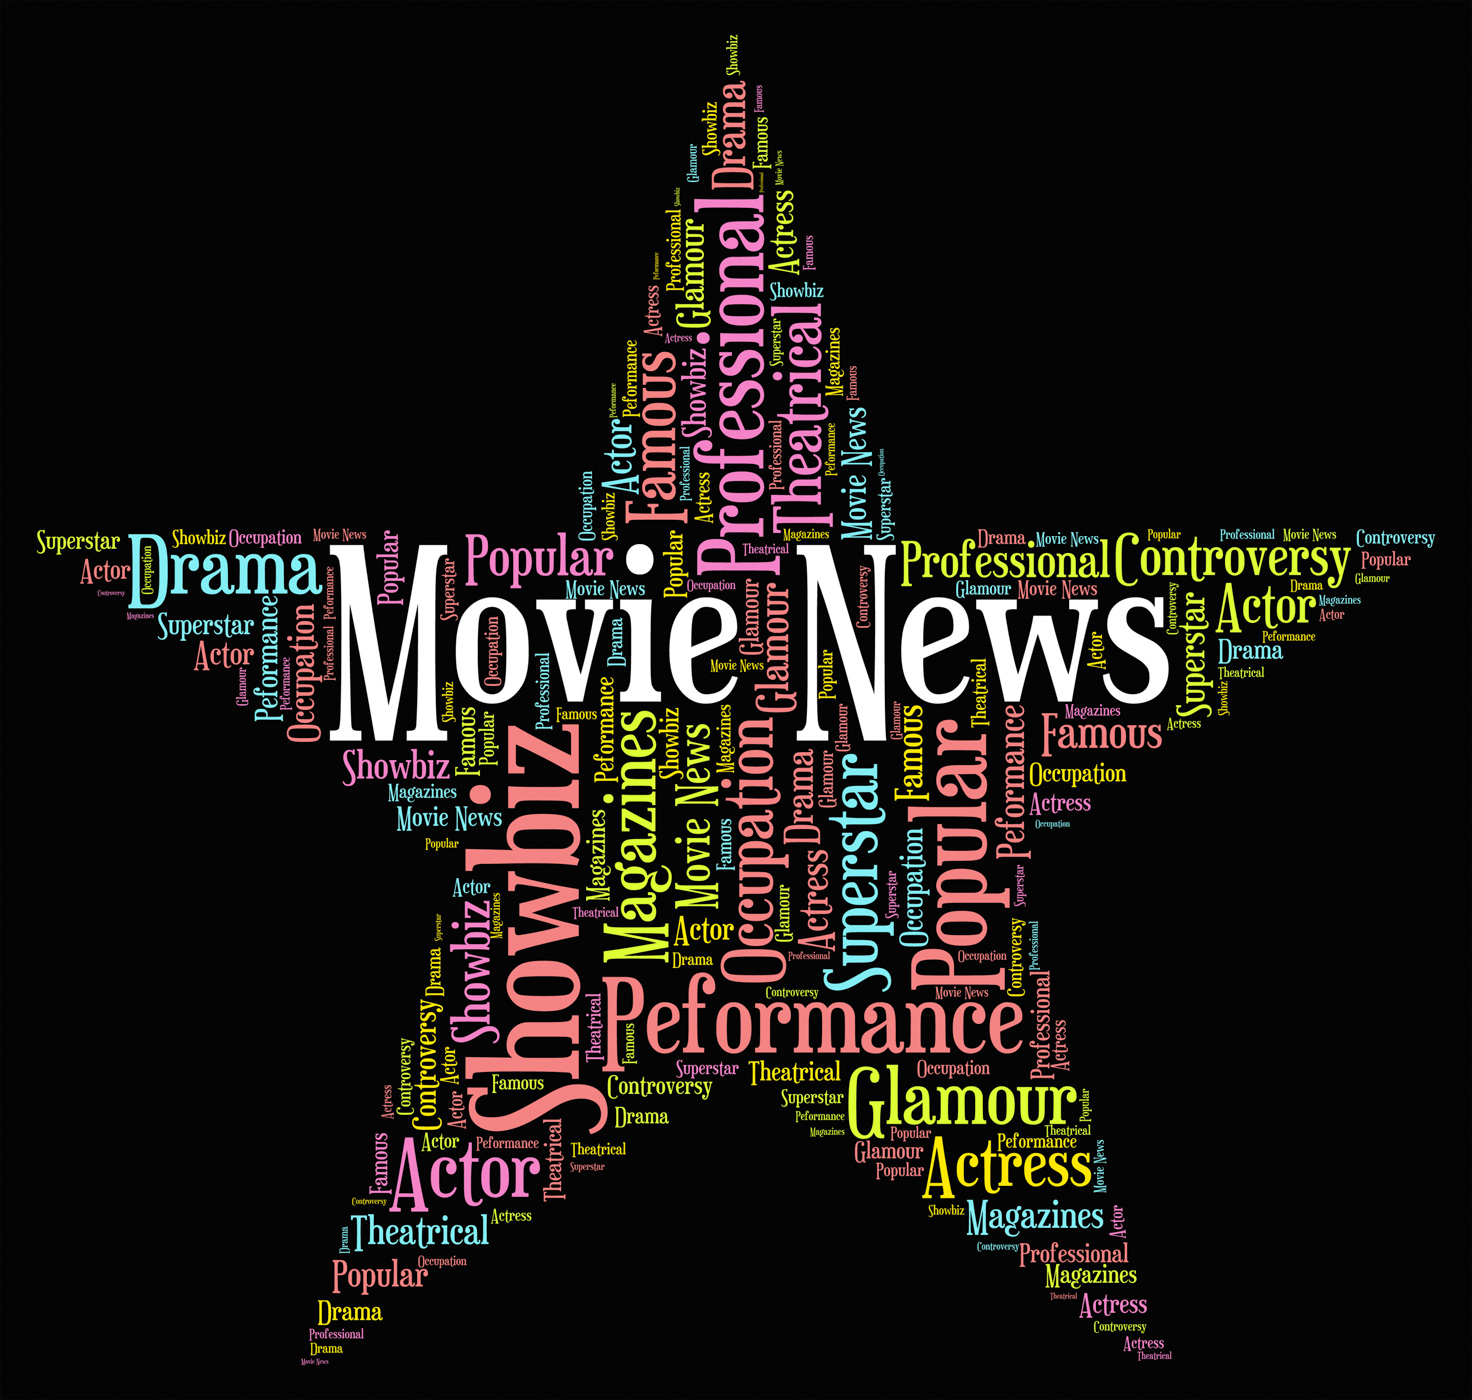 Movie news indicates hollywood movies and entertainment photo